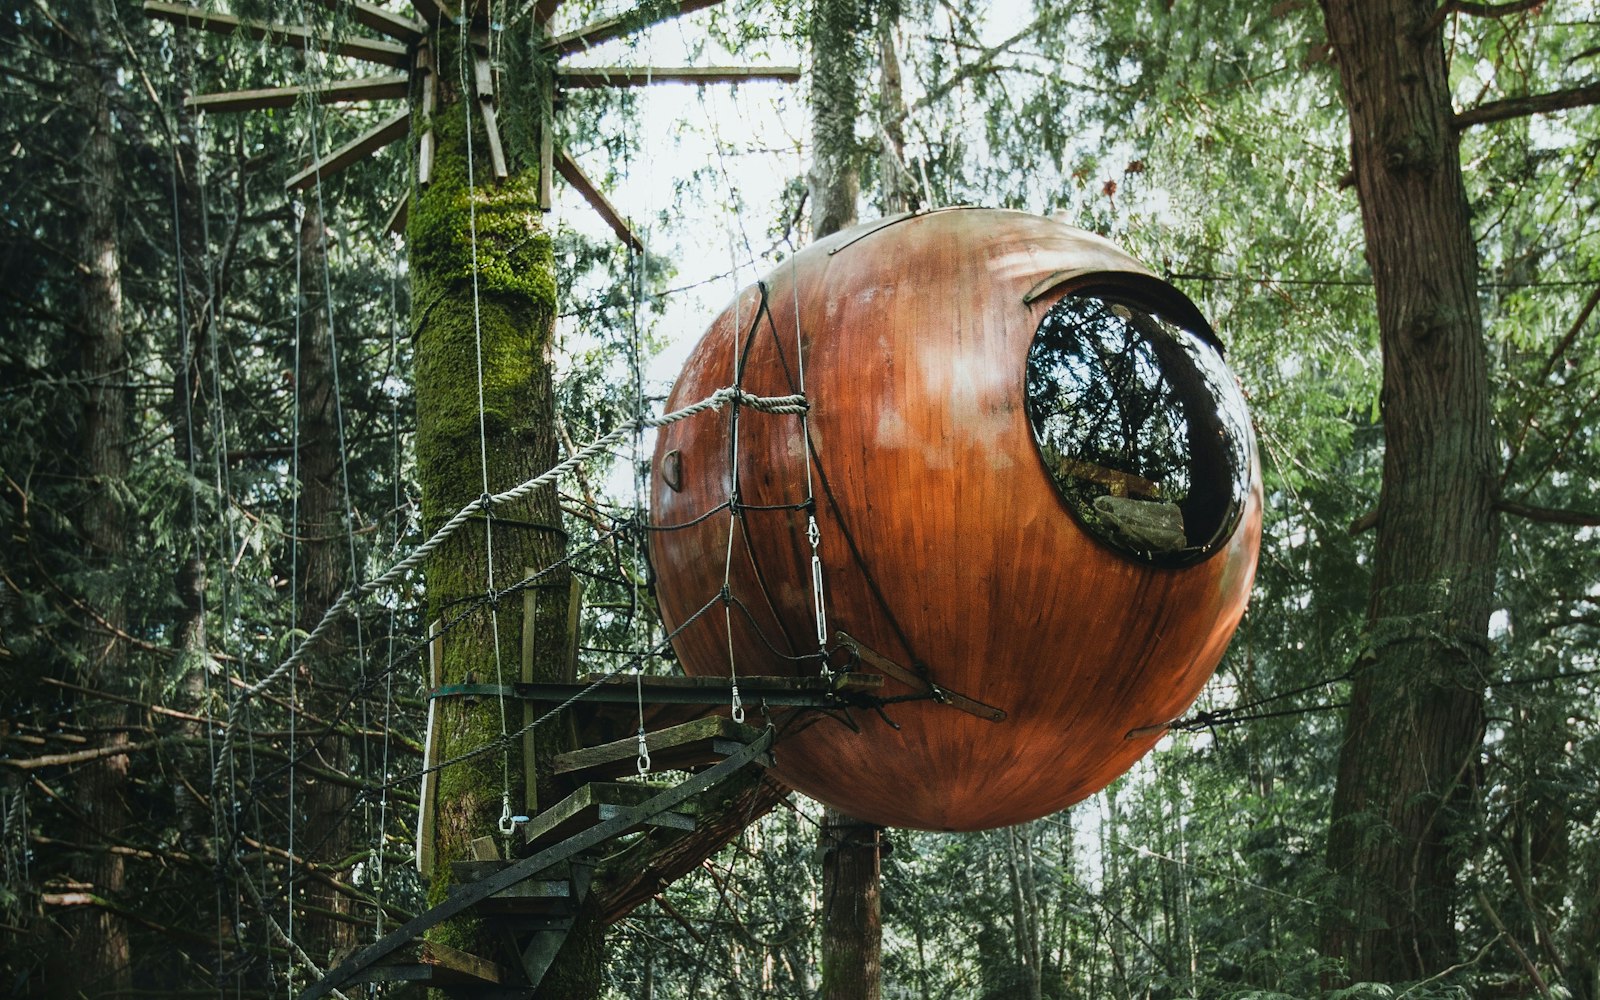 The Best Unusual Airbnbs